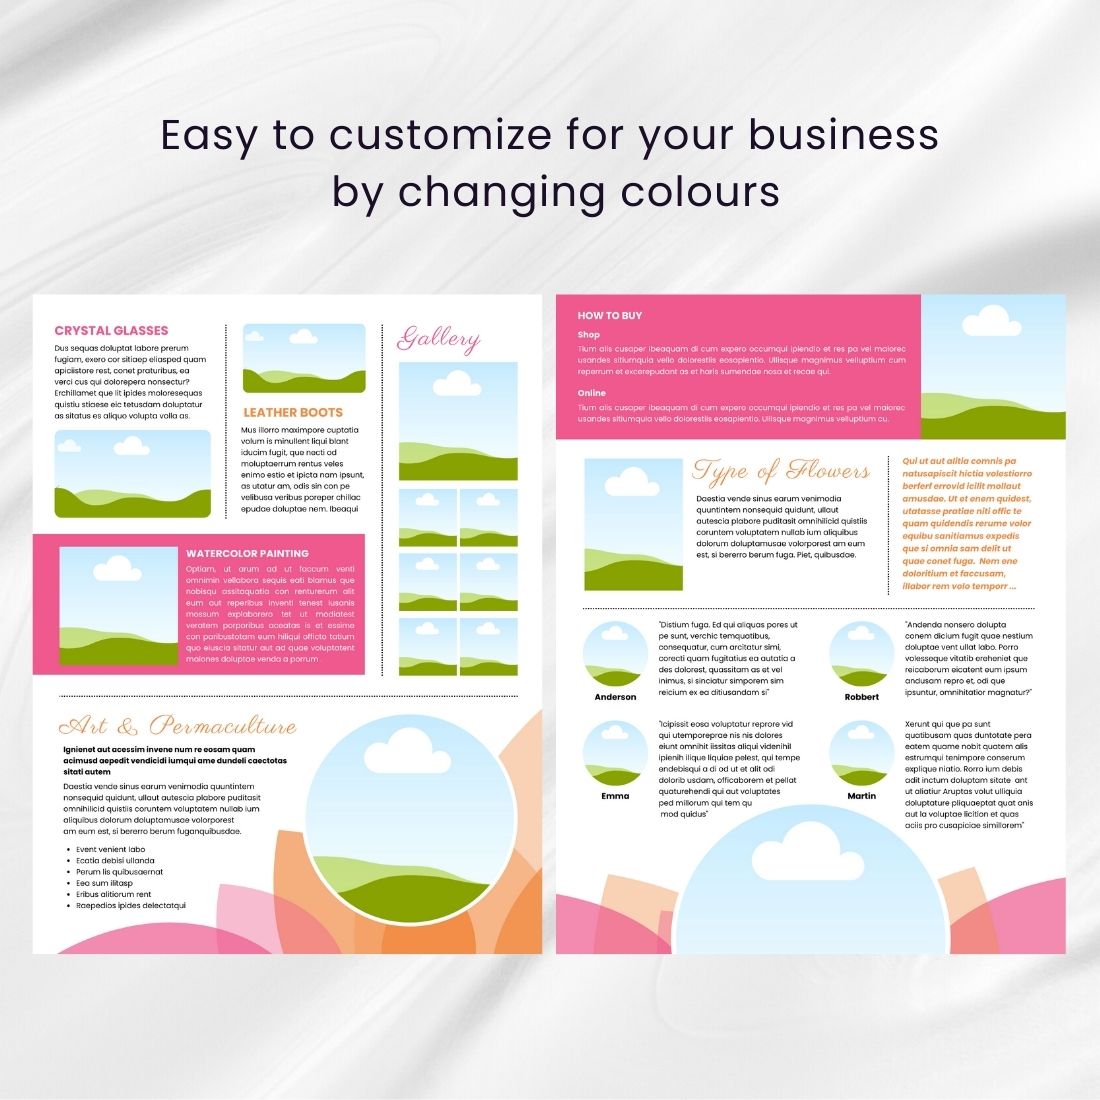 Easy to editable for your business by changing colors.